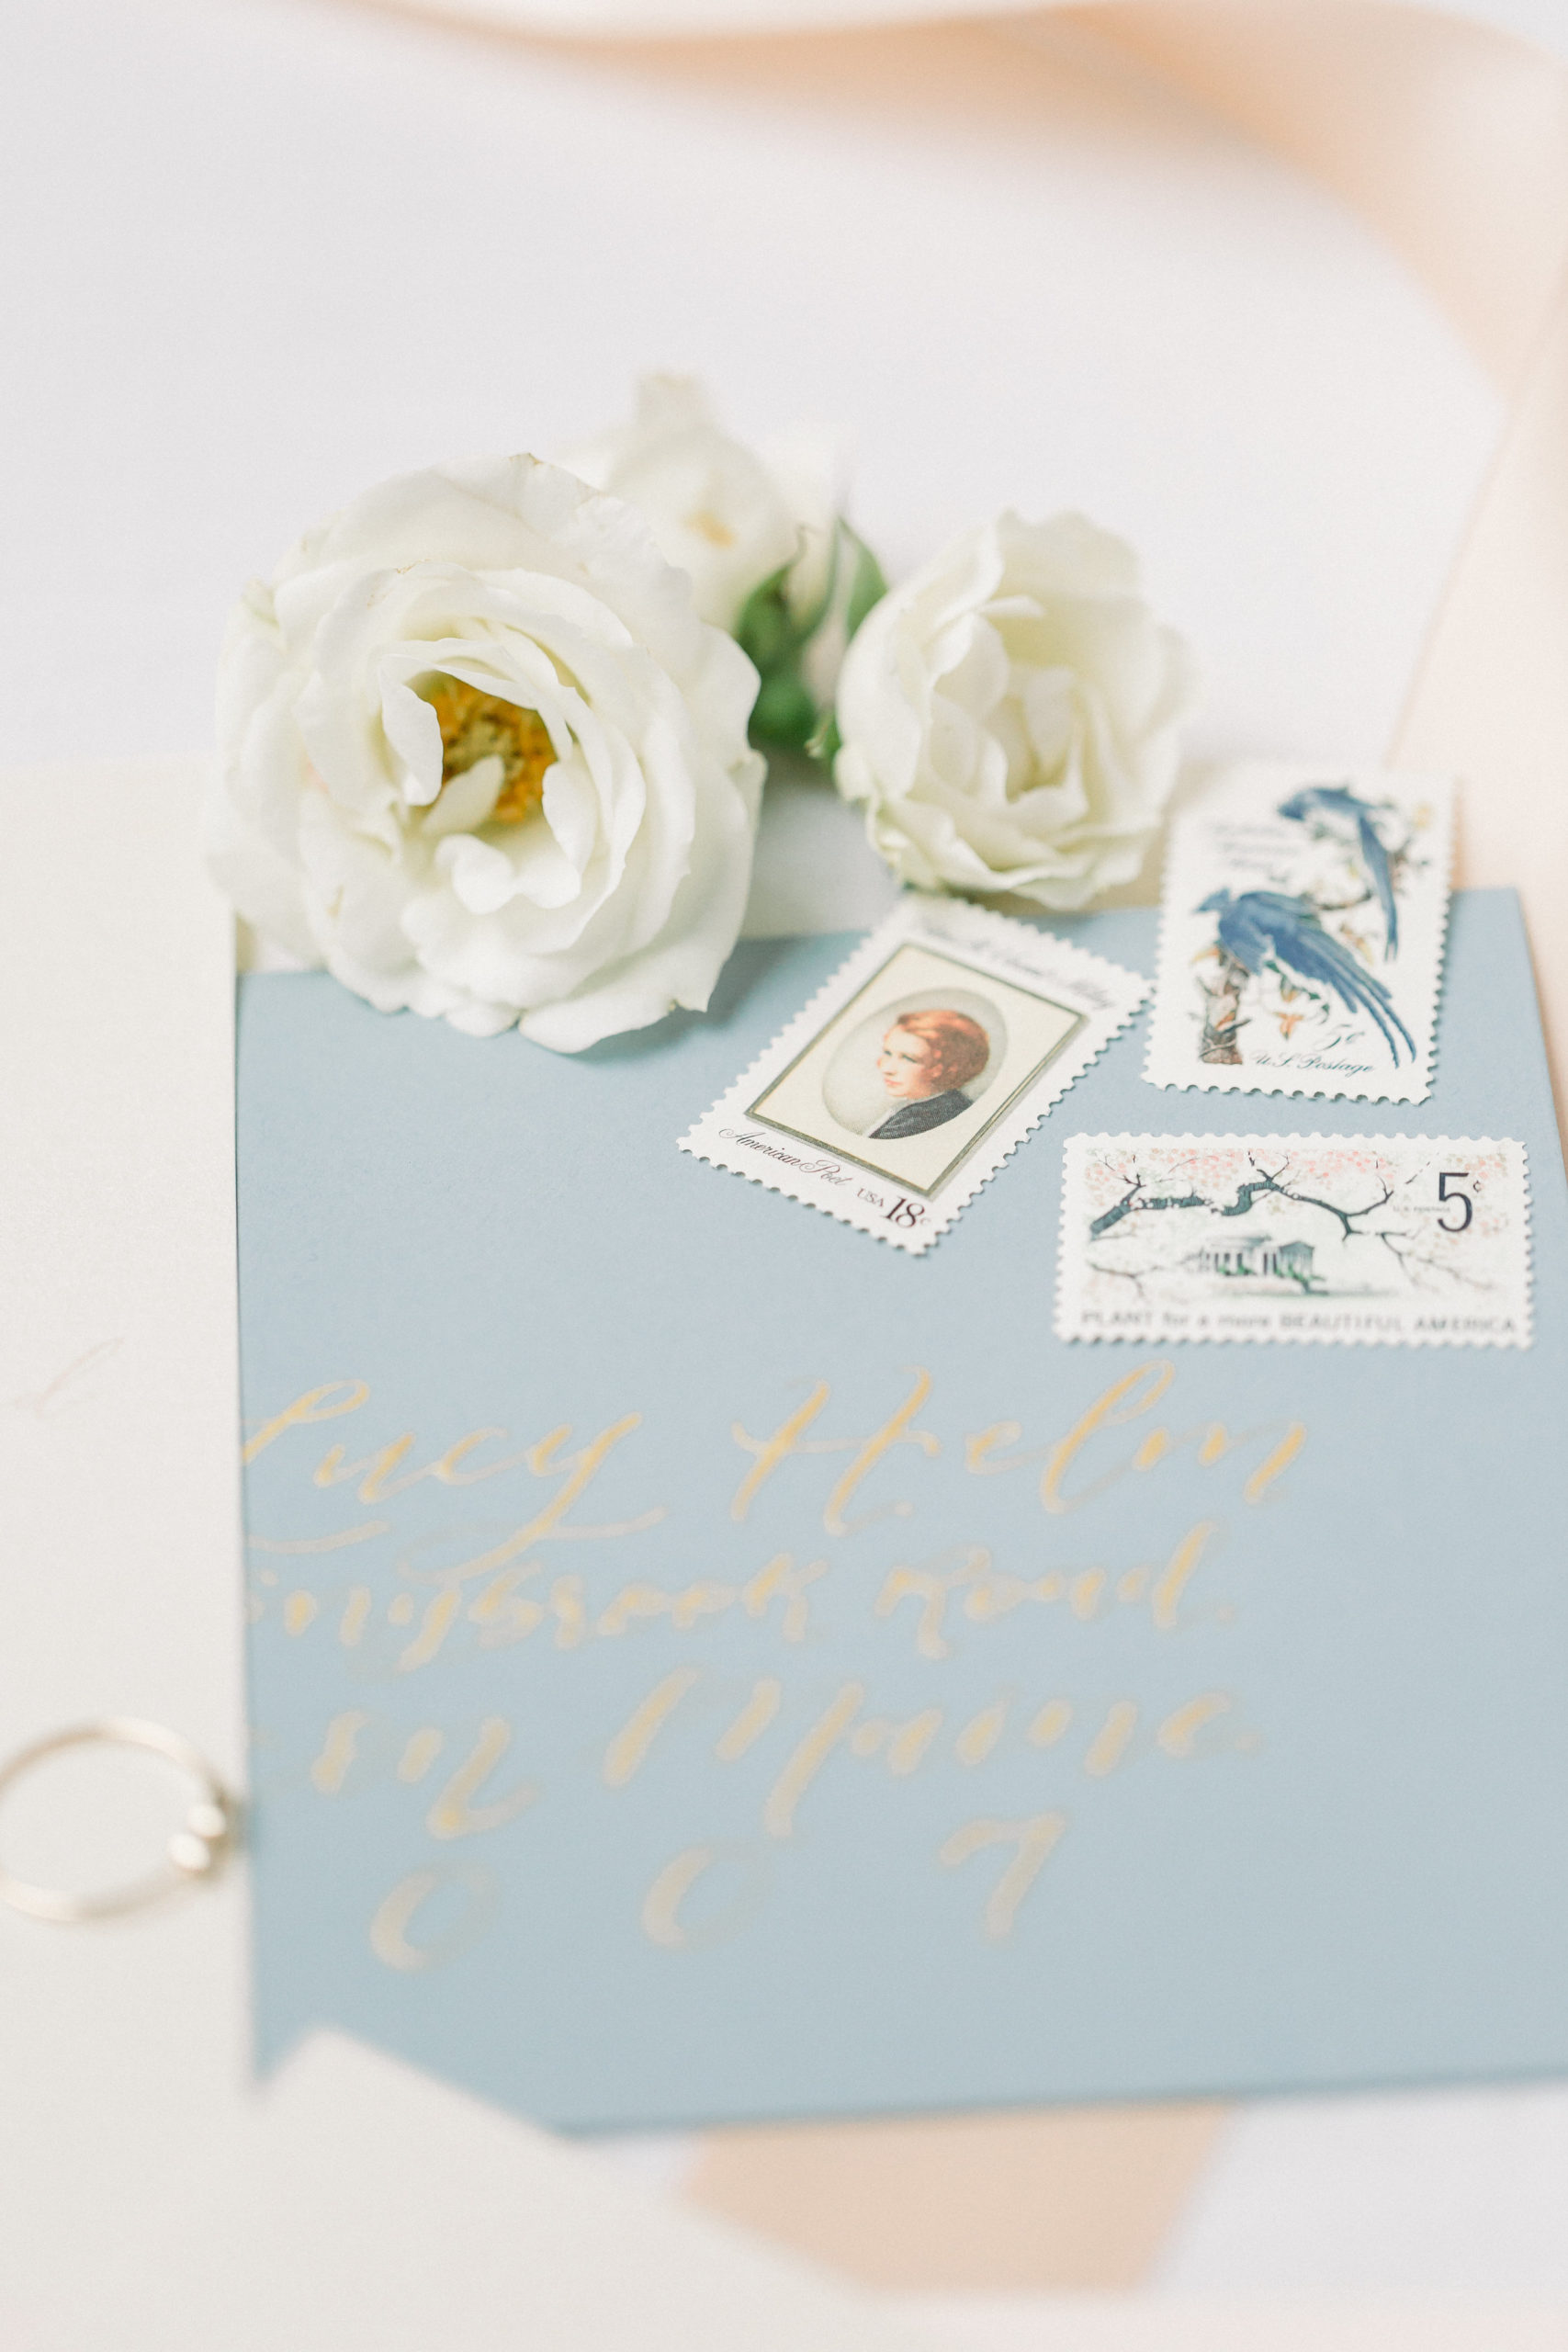 Pricing Postage for Wedding Invitations Dusty Blue Envelope with Gold Calligraphy and Vintage Postage